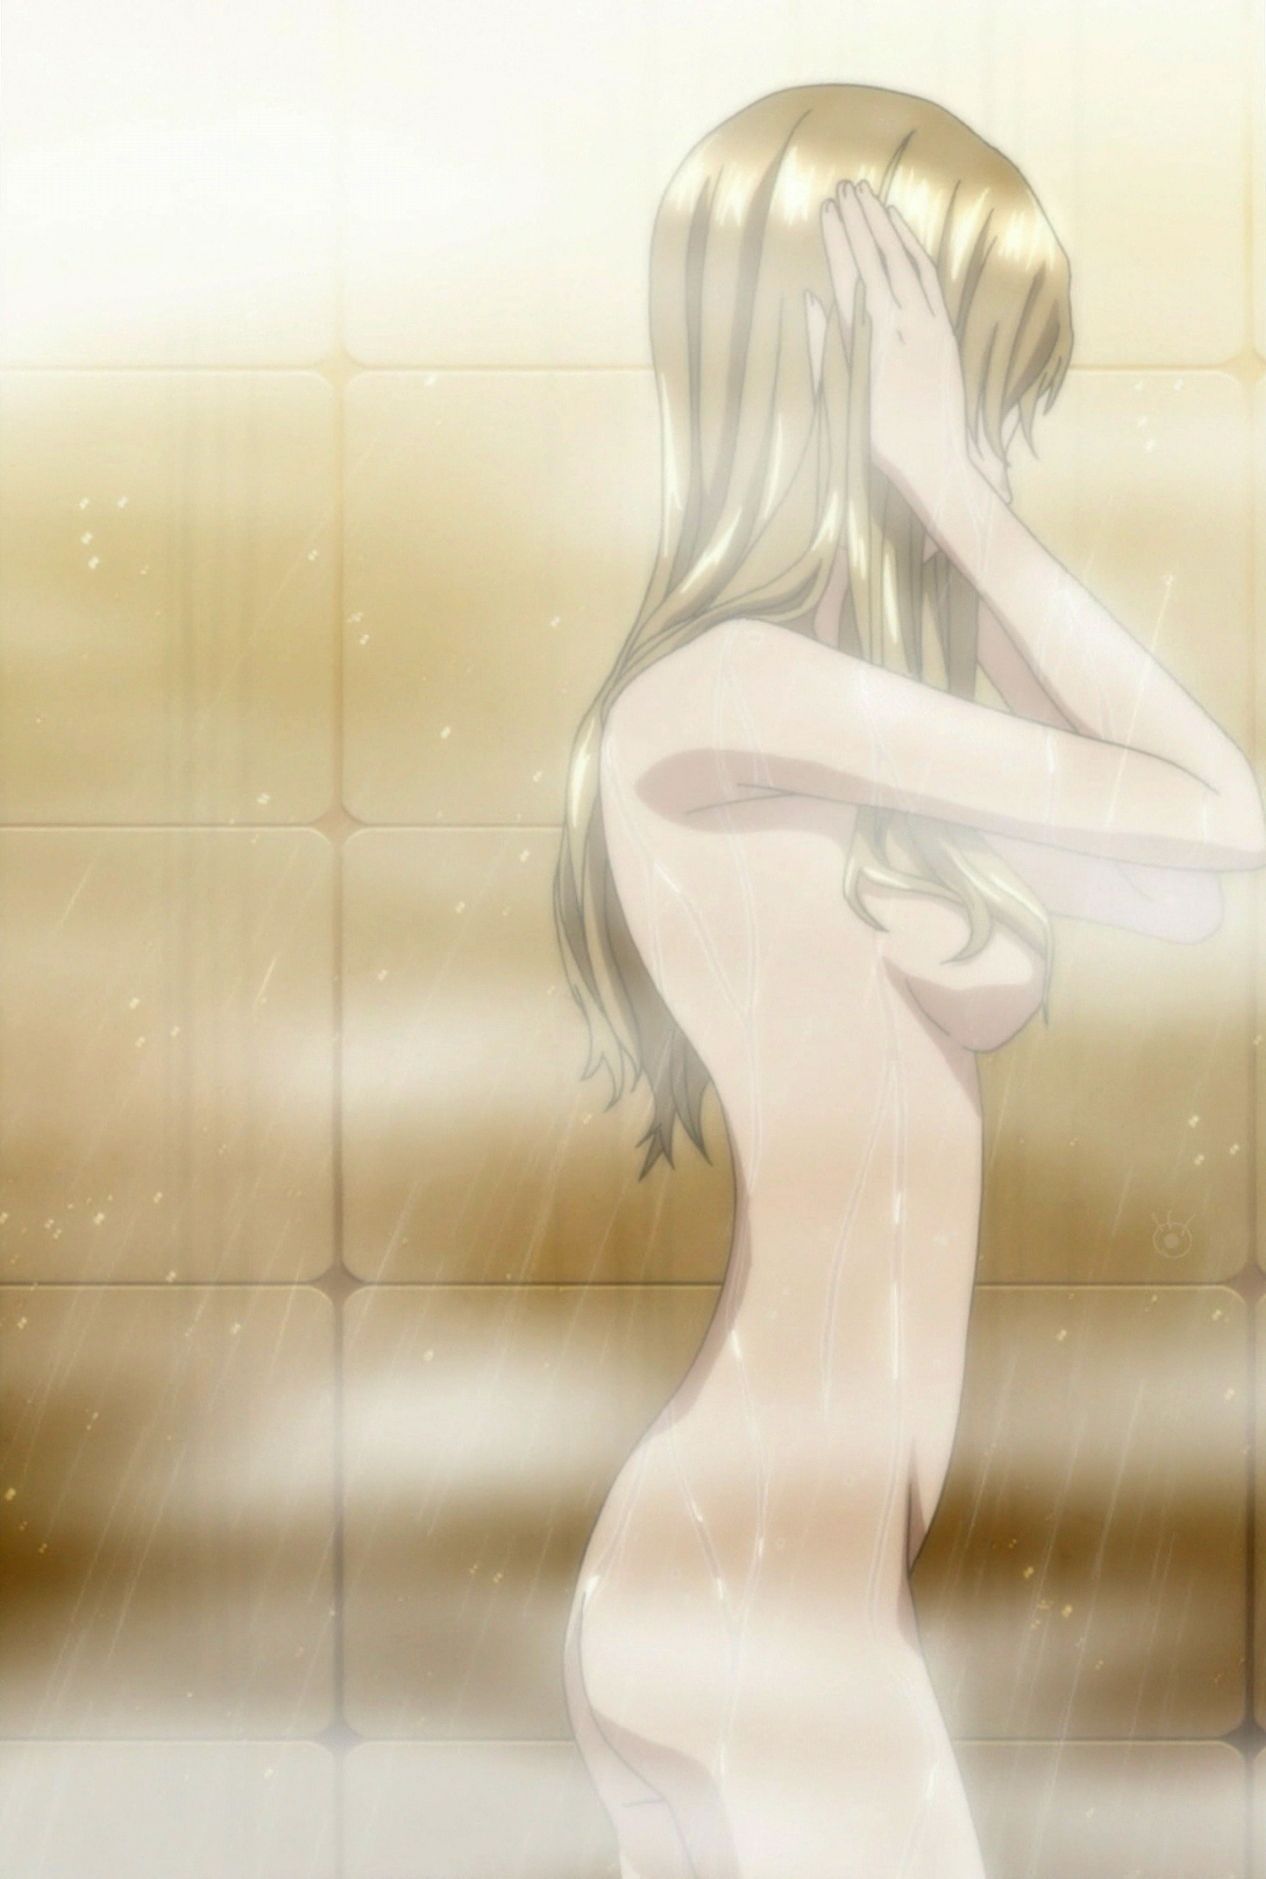 It's normal to be naked because it's a girl taking a bath, right? 2D erotic images that are not even good 24